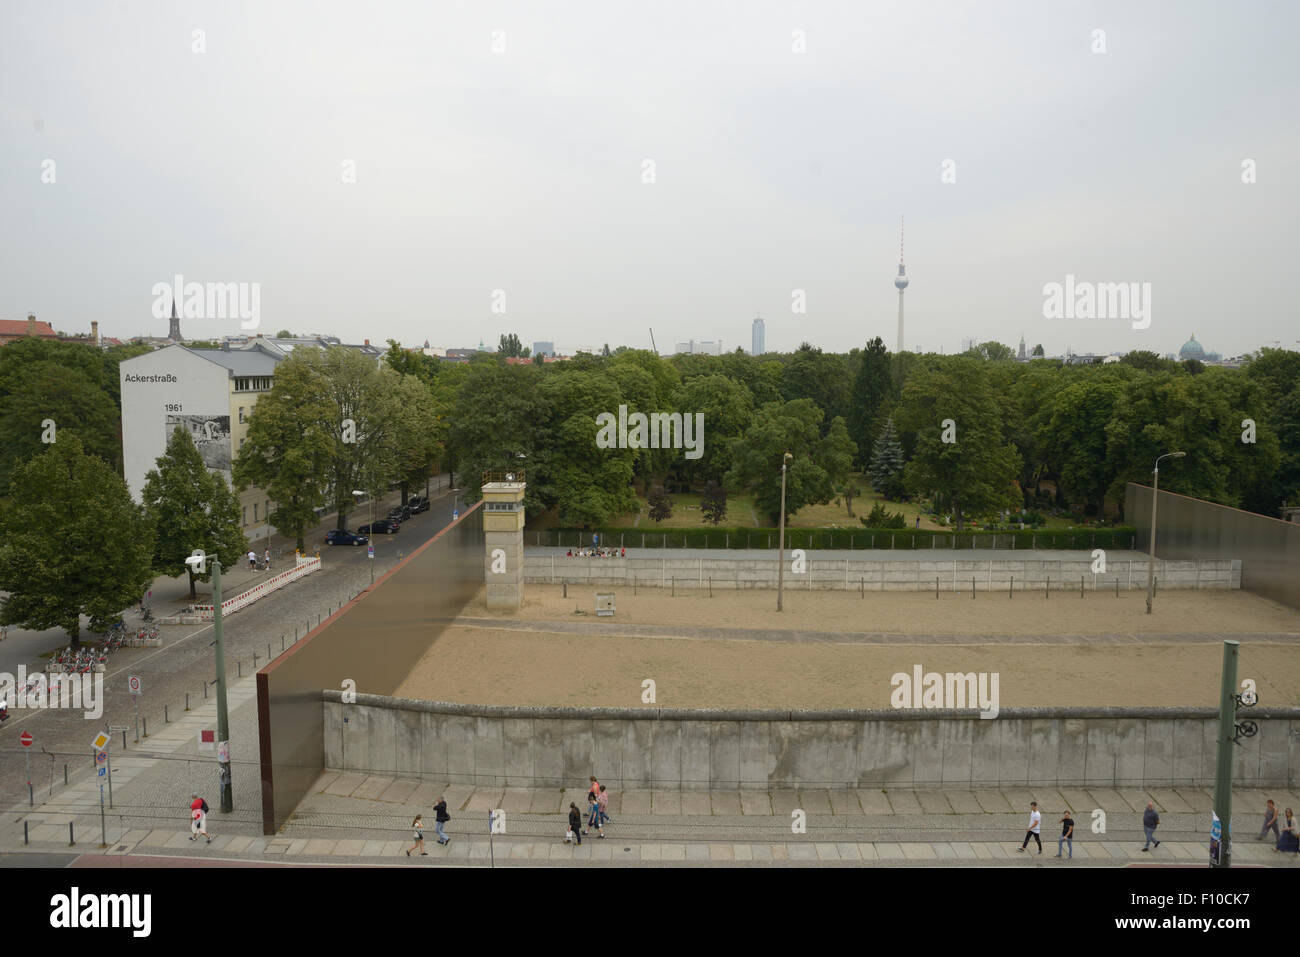 The Berlin Wall Memorial is the central memorial site of German division, Bernauer Strasse, the last piece of Berlin Wall. Stock Photo